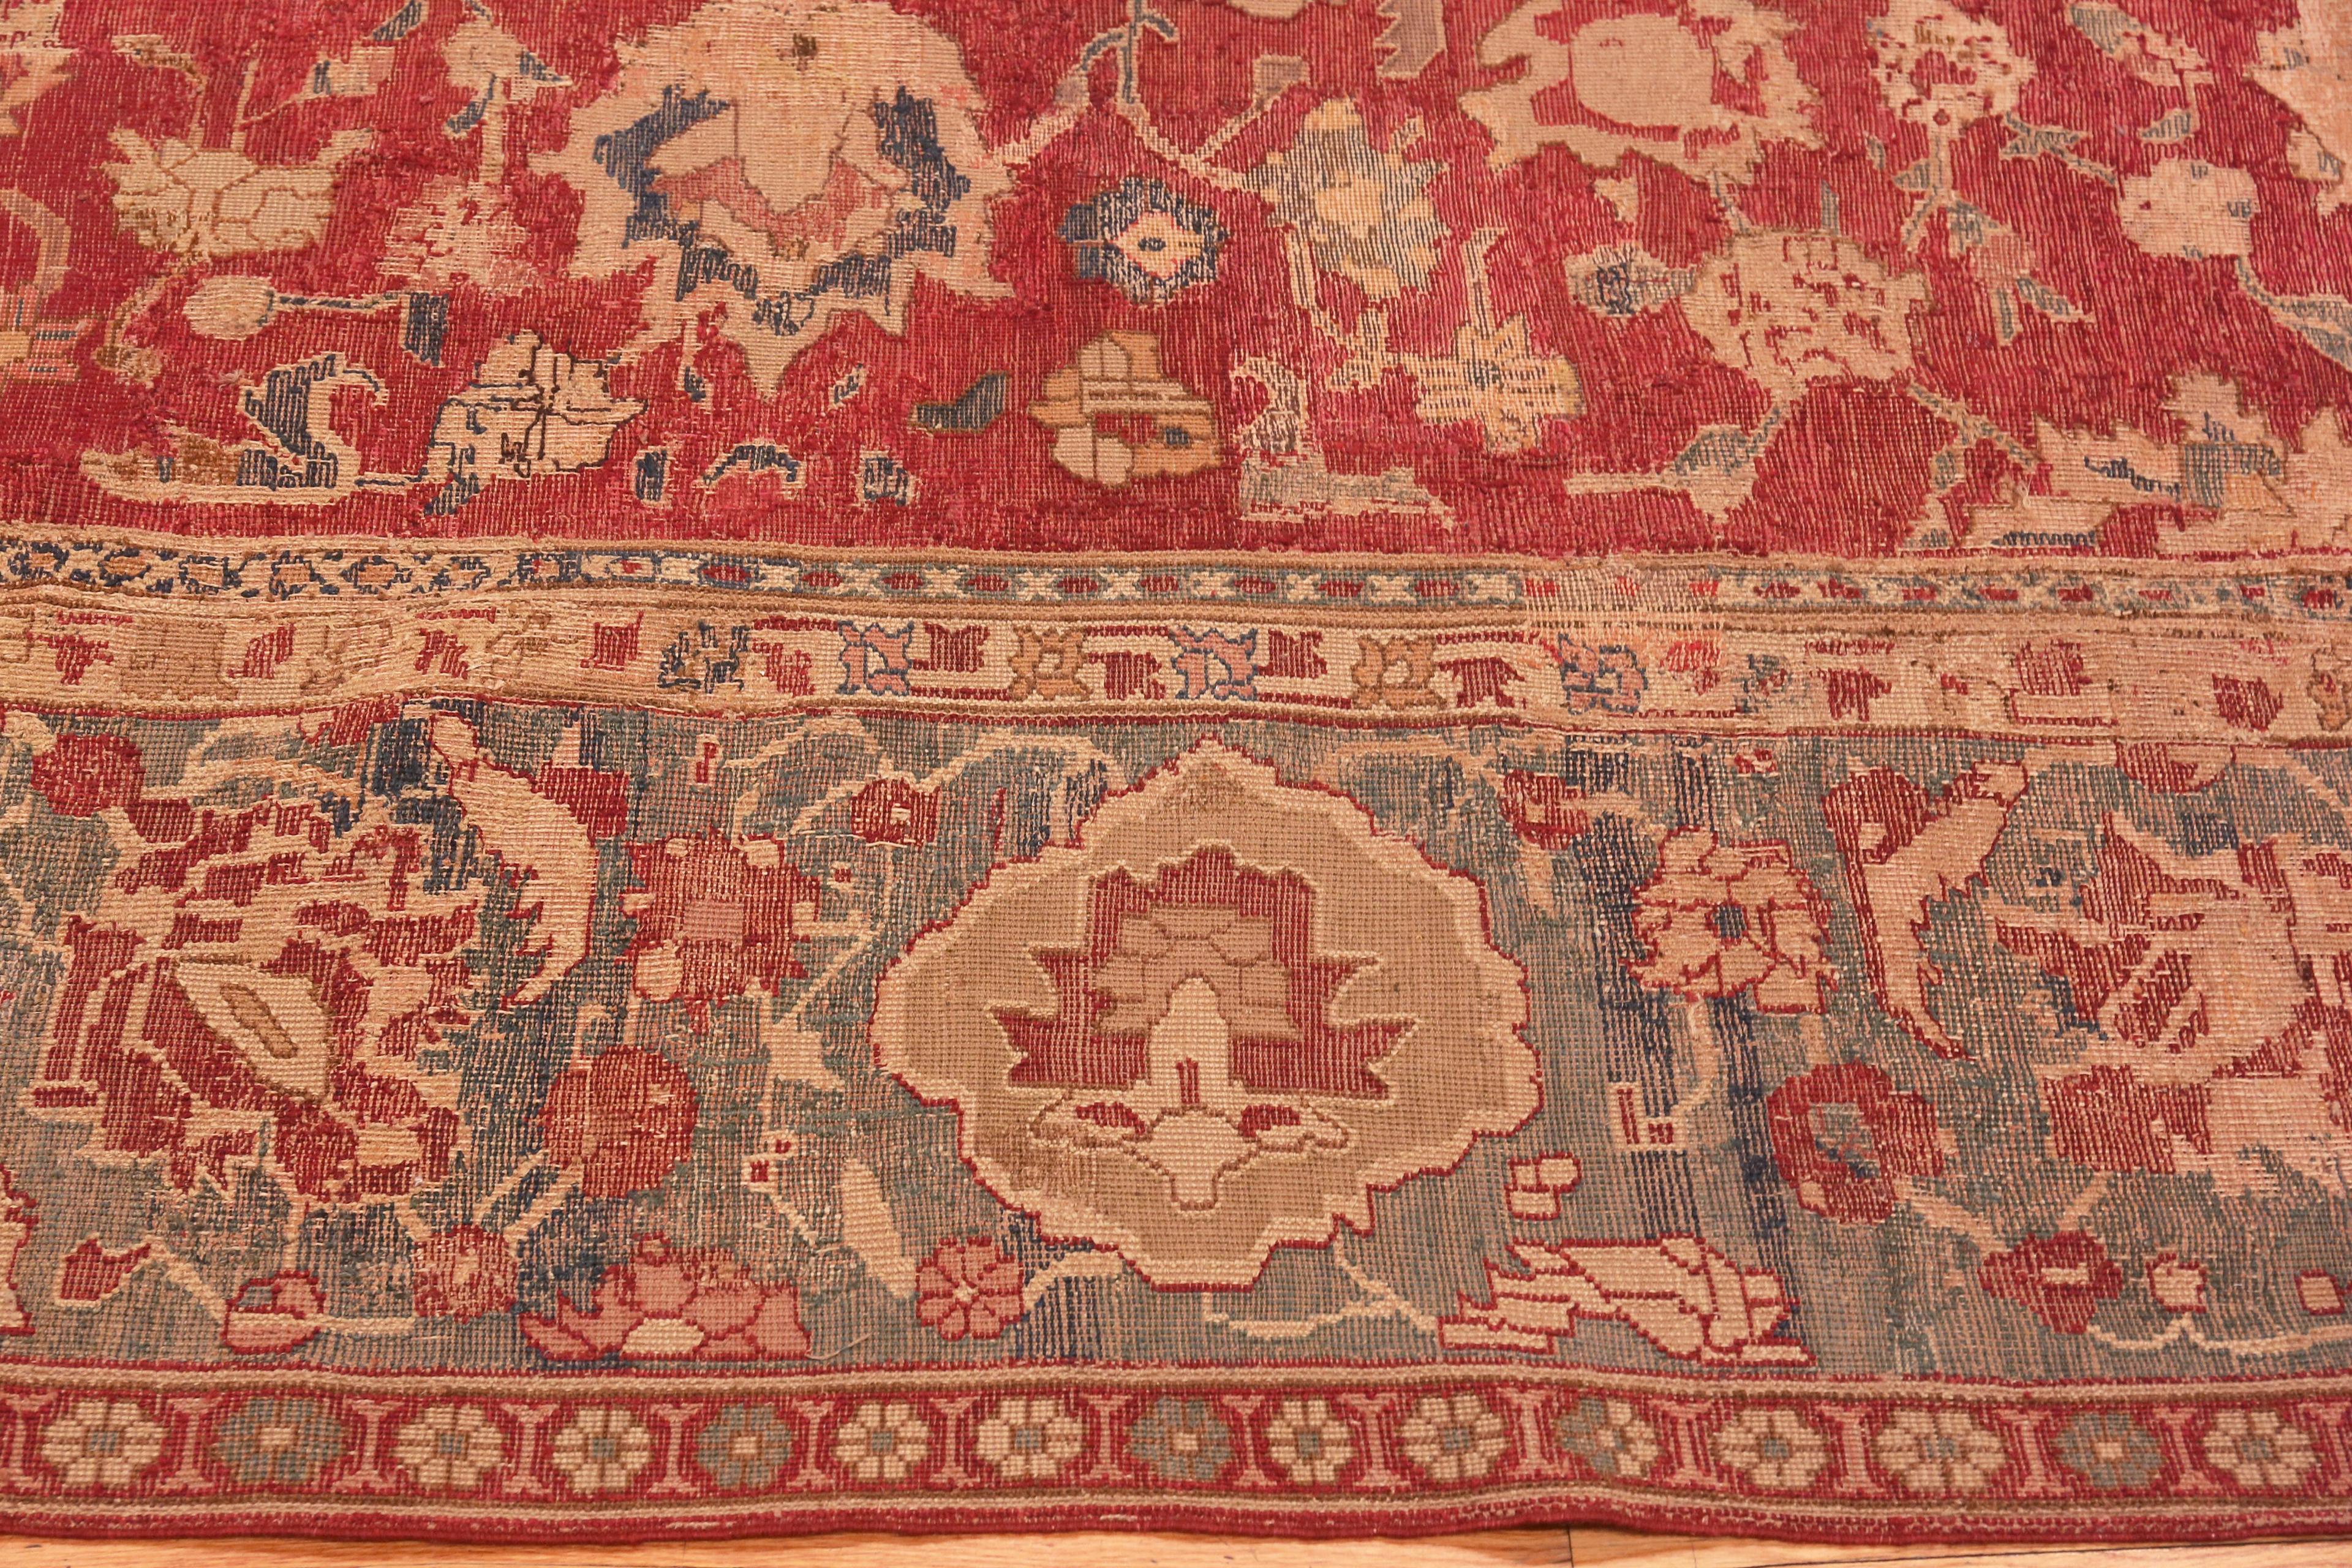 Beautiful 17th Century Antique Indian Mughal Gallery Size Rug, Country Of Origin: India, Circa Date: 17th Century. Size: 6 ft 7 in x 13 ft (2.01 m x 3.96 m)